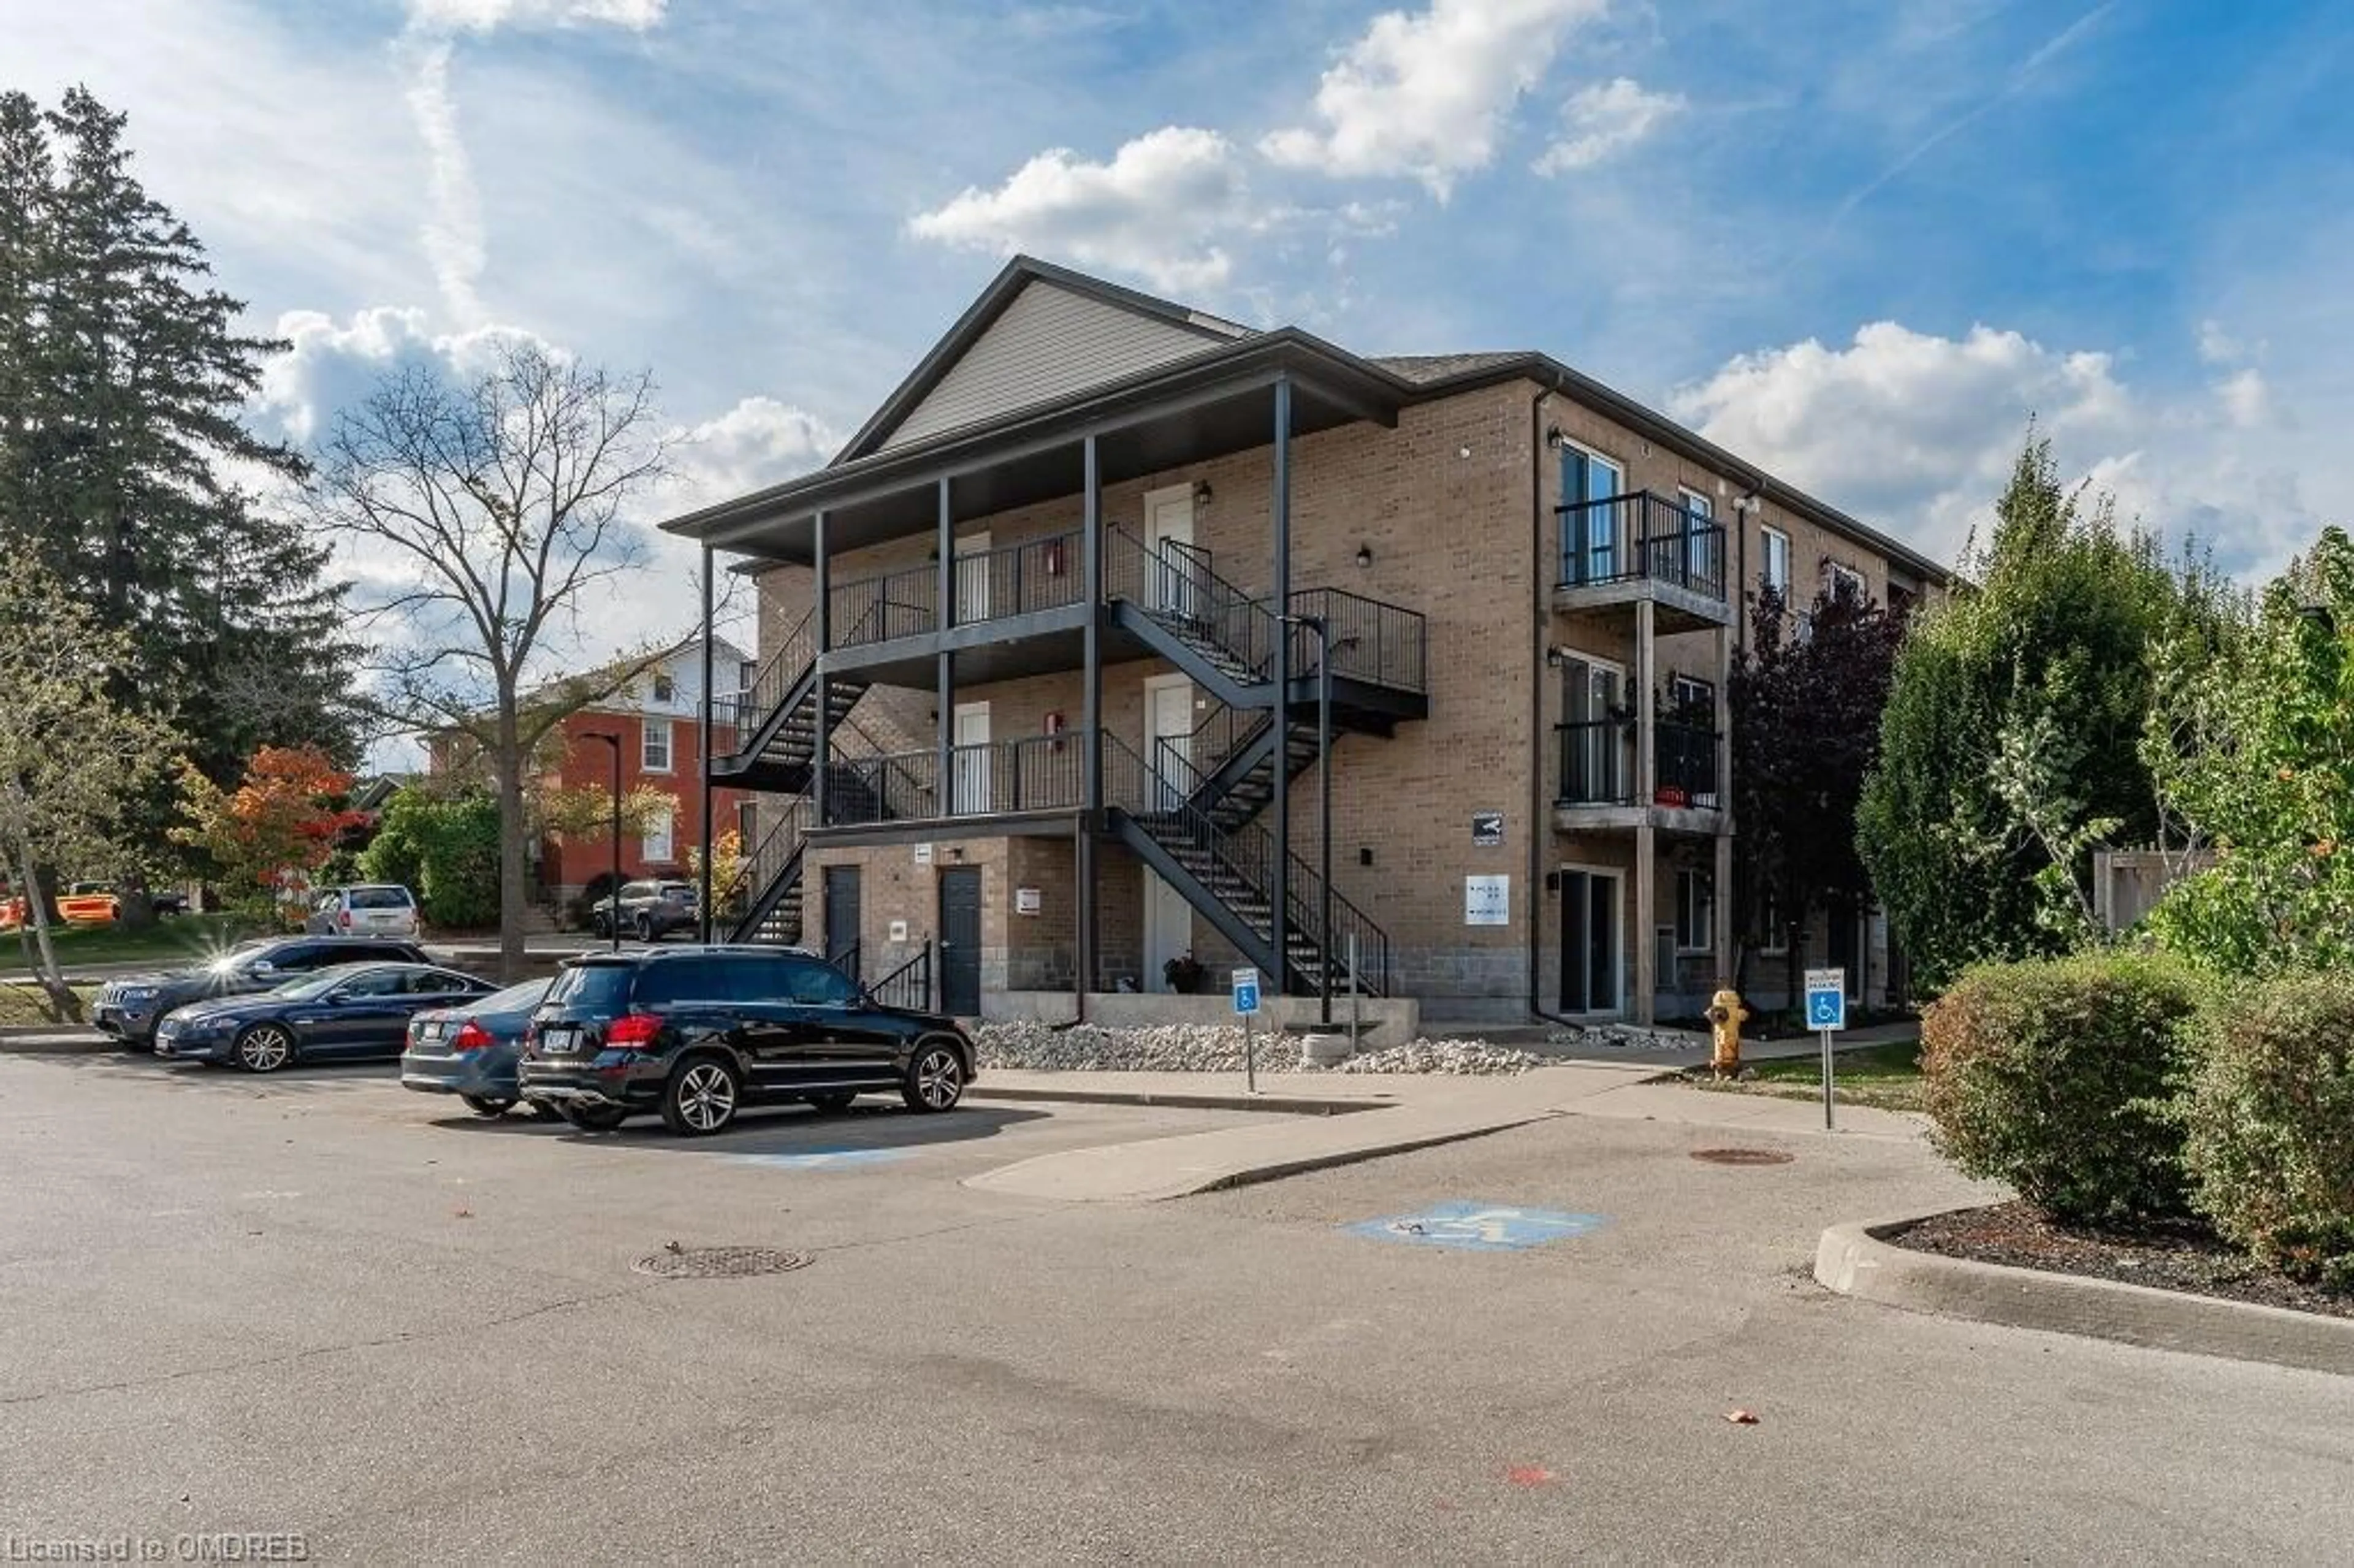 Street view for 185 Windale Cres #4B, Kitchener Ontario N2E 0G3